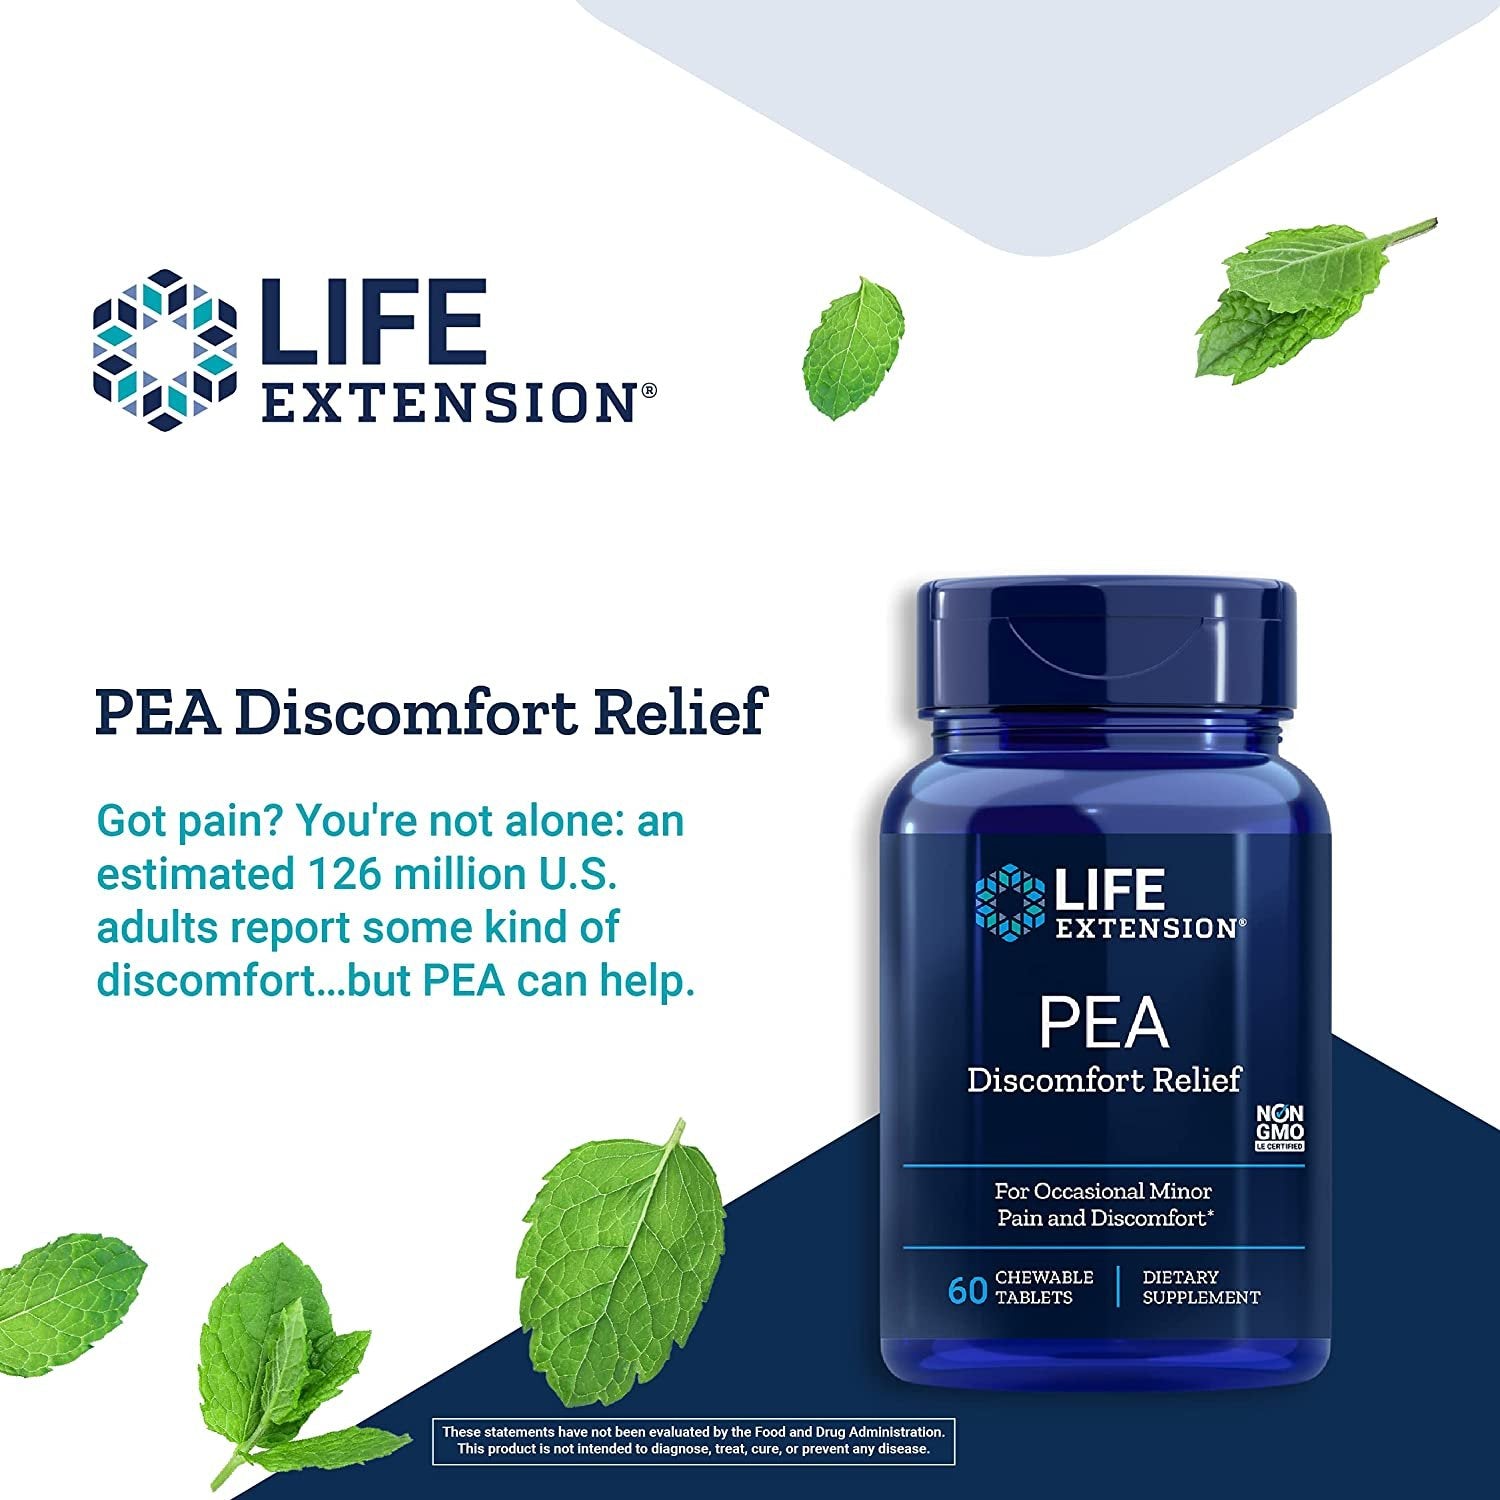 Life Extension Pea Discomfort Relief (Berry Flavor) for Occasional Minor Pain & Discomfort – Palmitoylethanolamide Supplement Pills - Gluten-Free, Non-GMO, Vegetarian – 60 Chewable Tablets